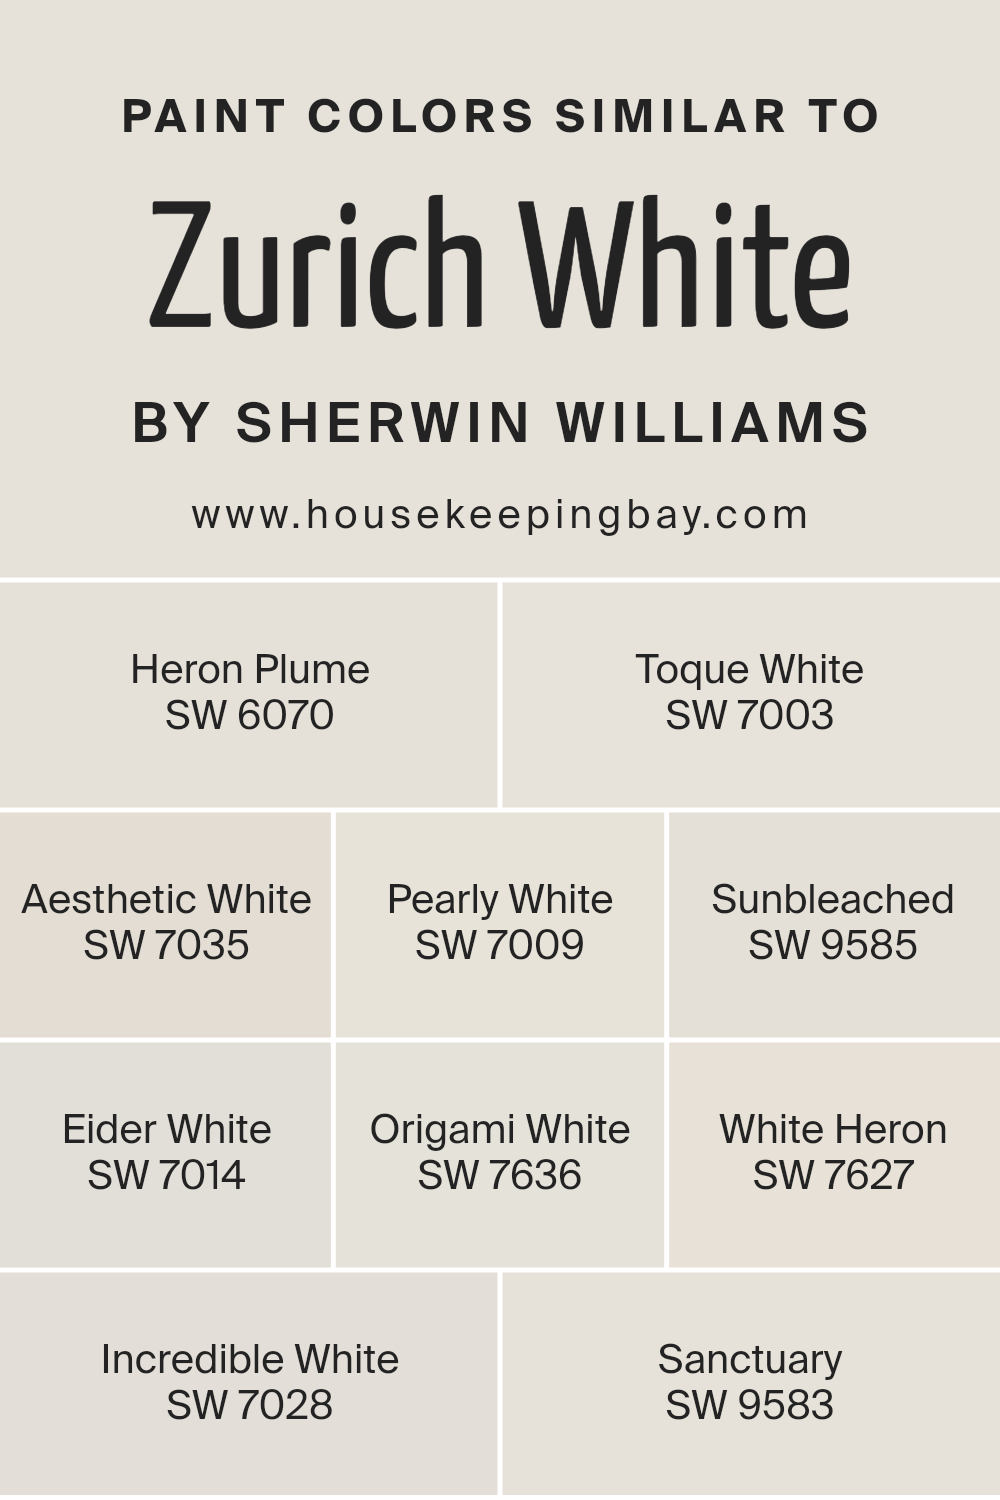 colors_similar_to_zurich_white_sw_7626